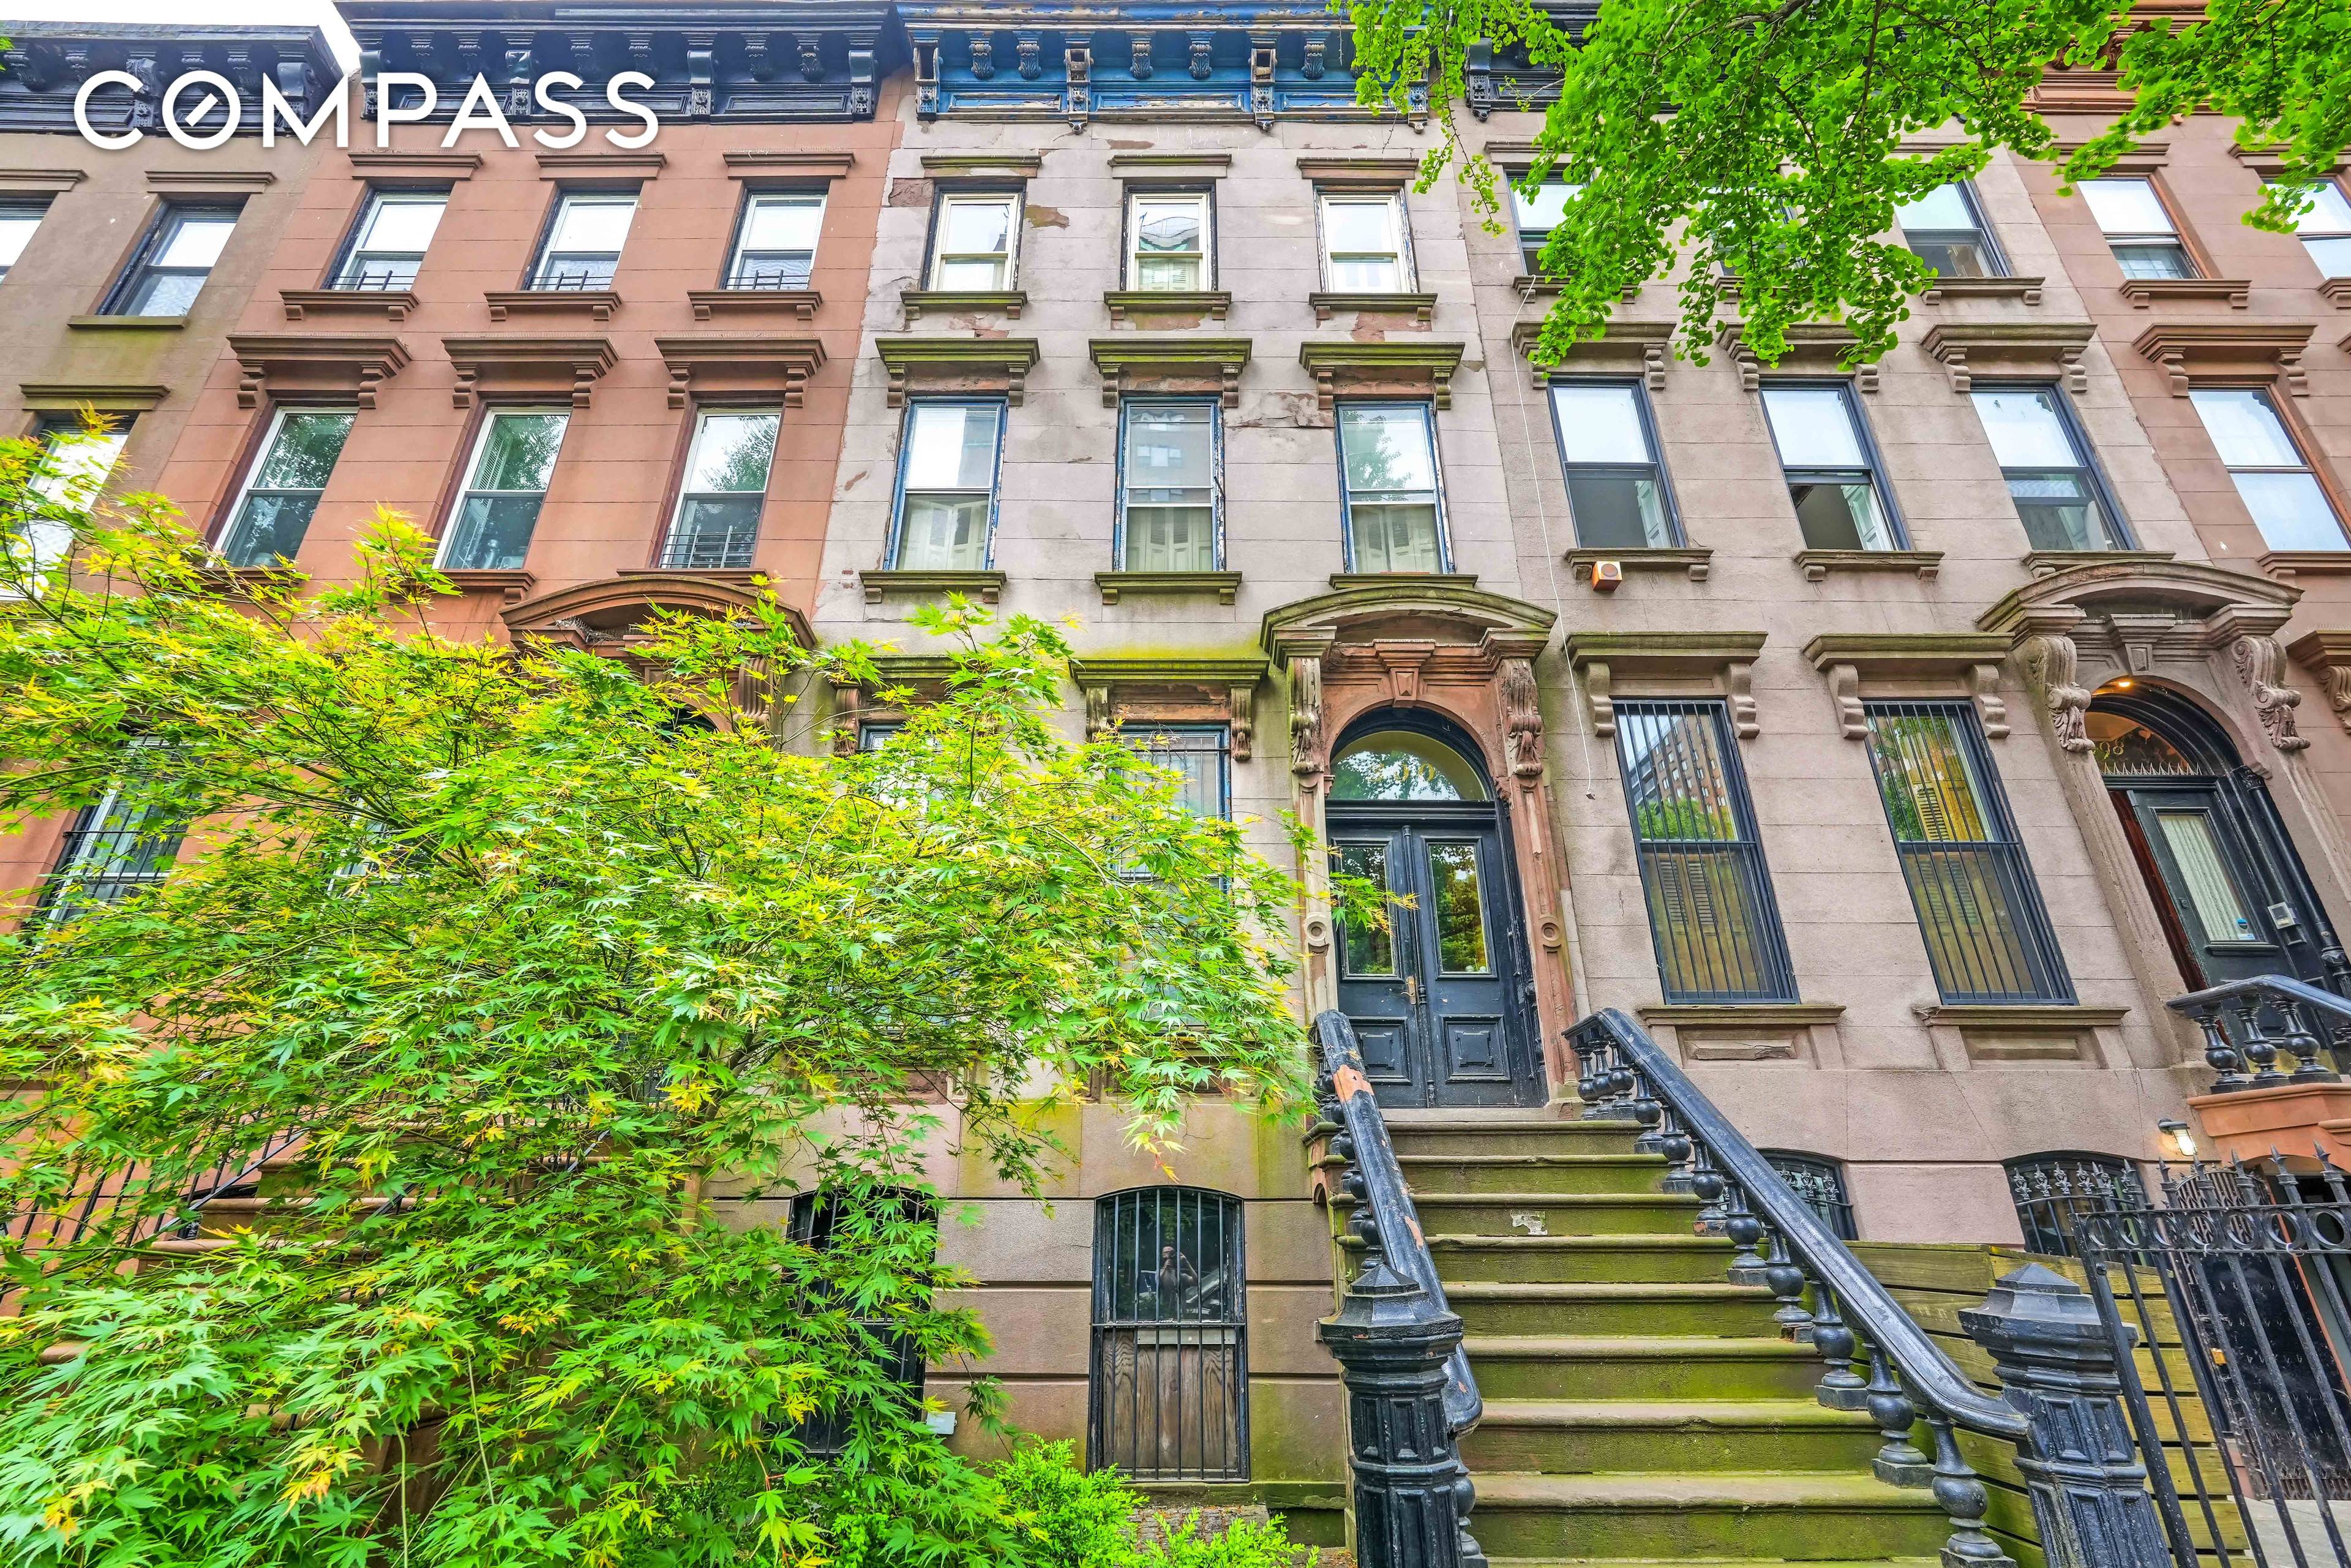 Introducing 300 Lafayette Ave, an extraordinary four family brownstone townhouse nestled in the esteemed Clinton Hill Historic District of Brooklyn, NY.